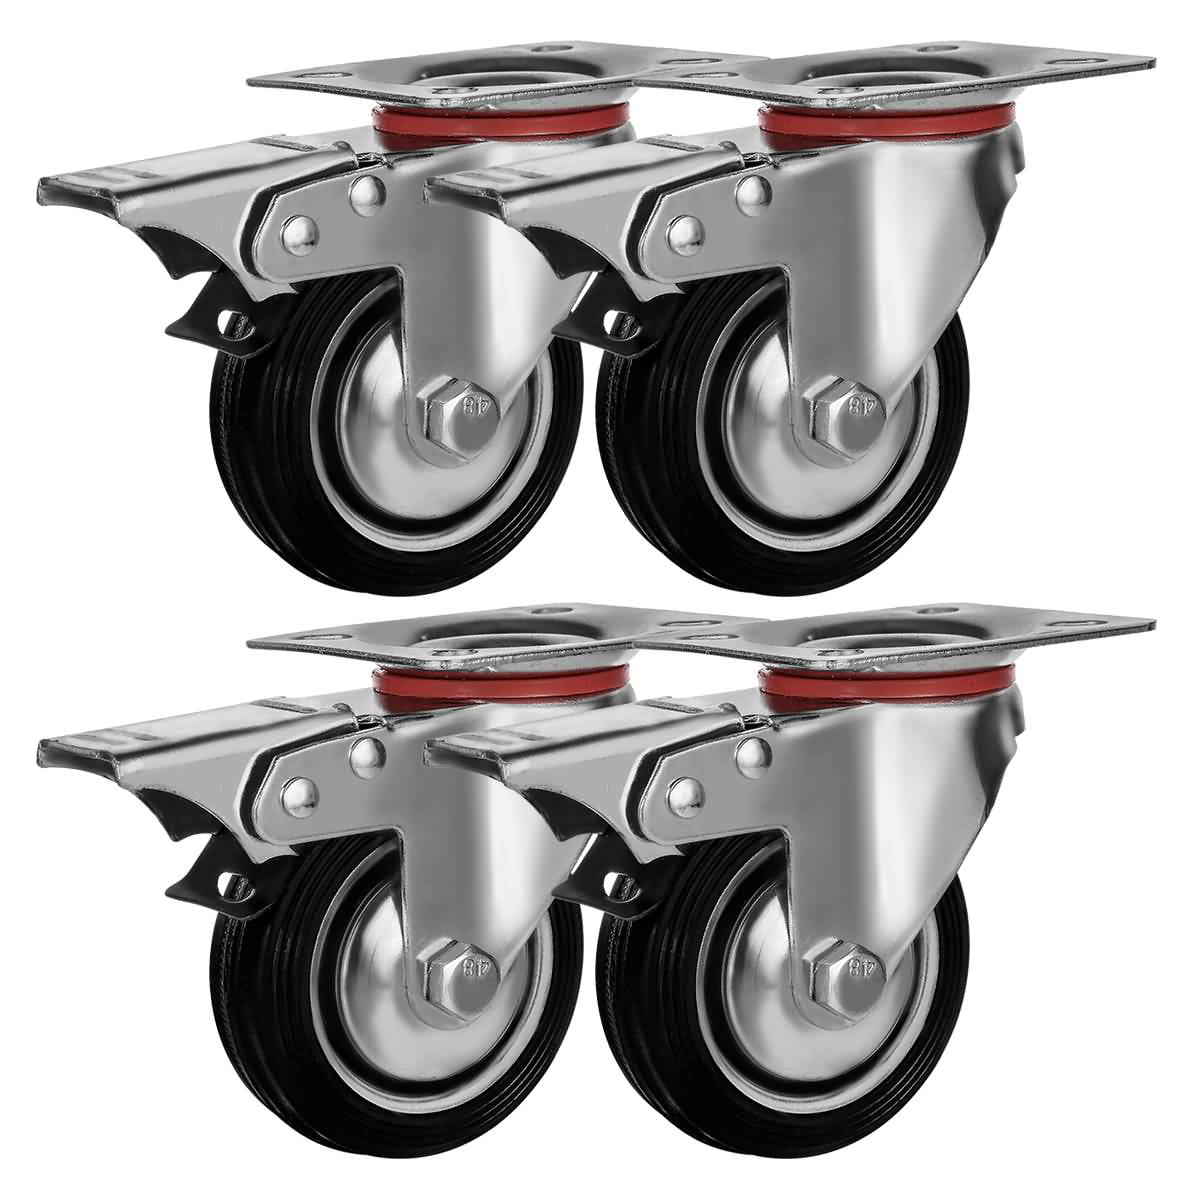 4 Pieces 3" Rollerblade Style Caster Wheels Heavy Duty Non-Marring Clear Rubber 